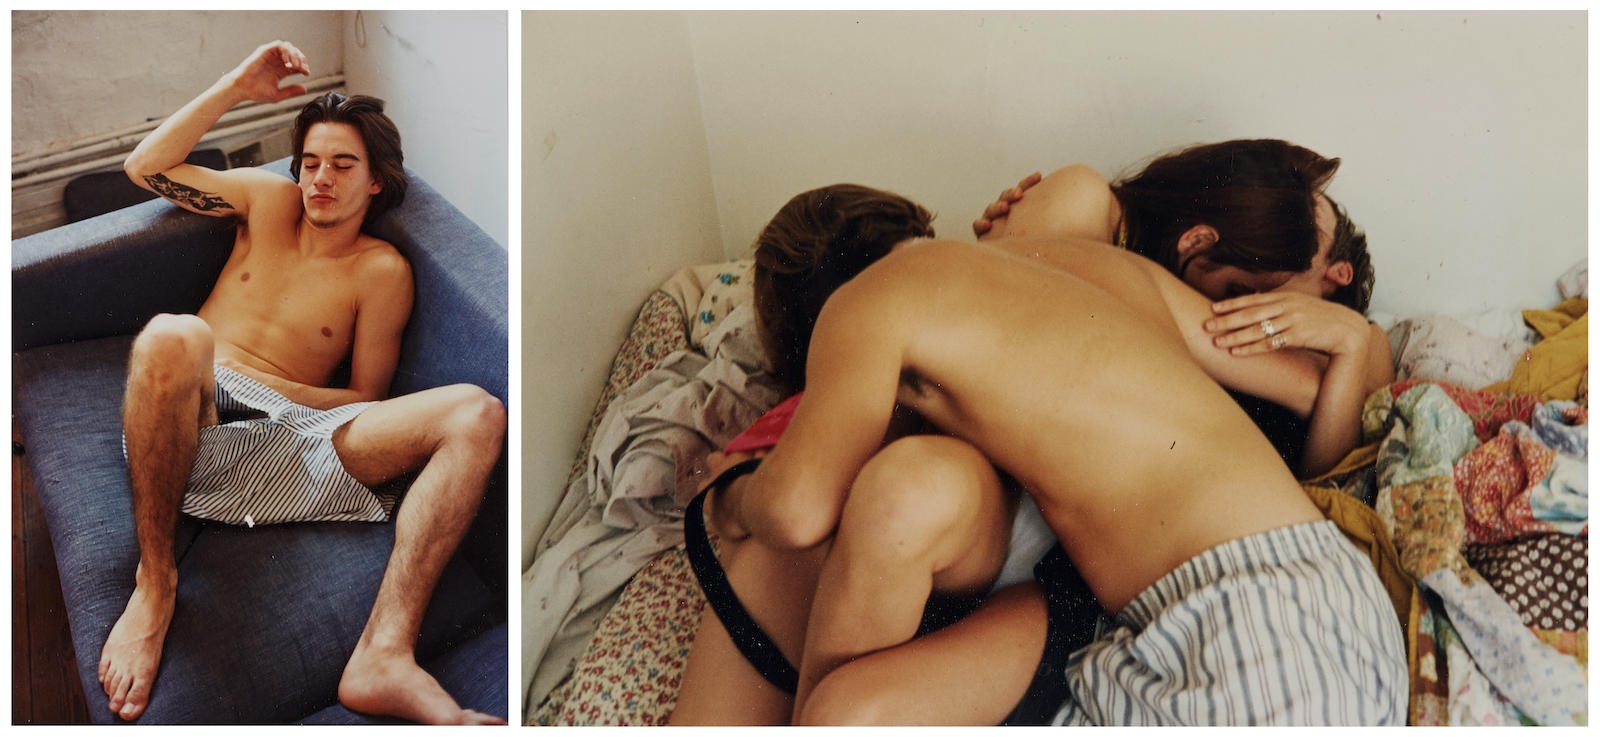 Untitled (Kids) 2 by Larry Clark, circa 1995